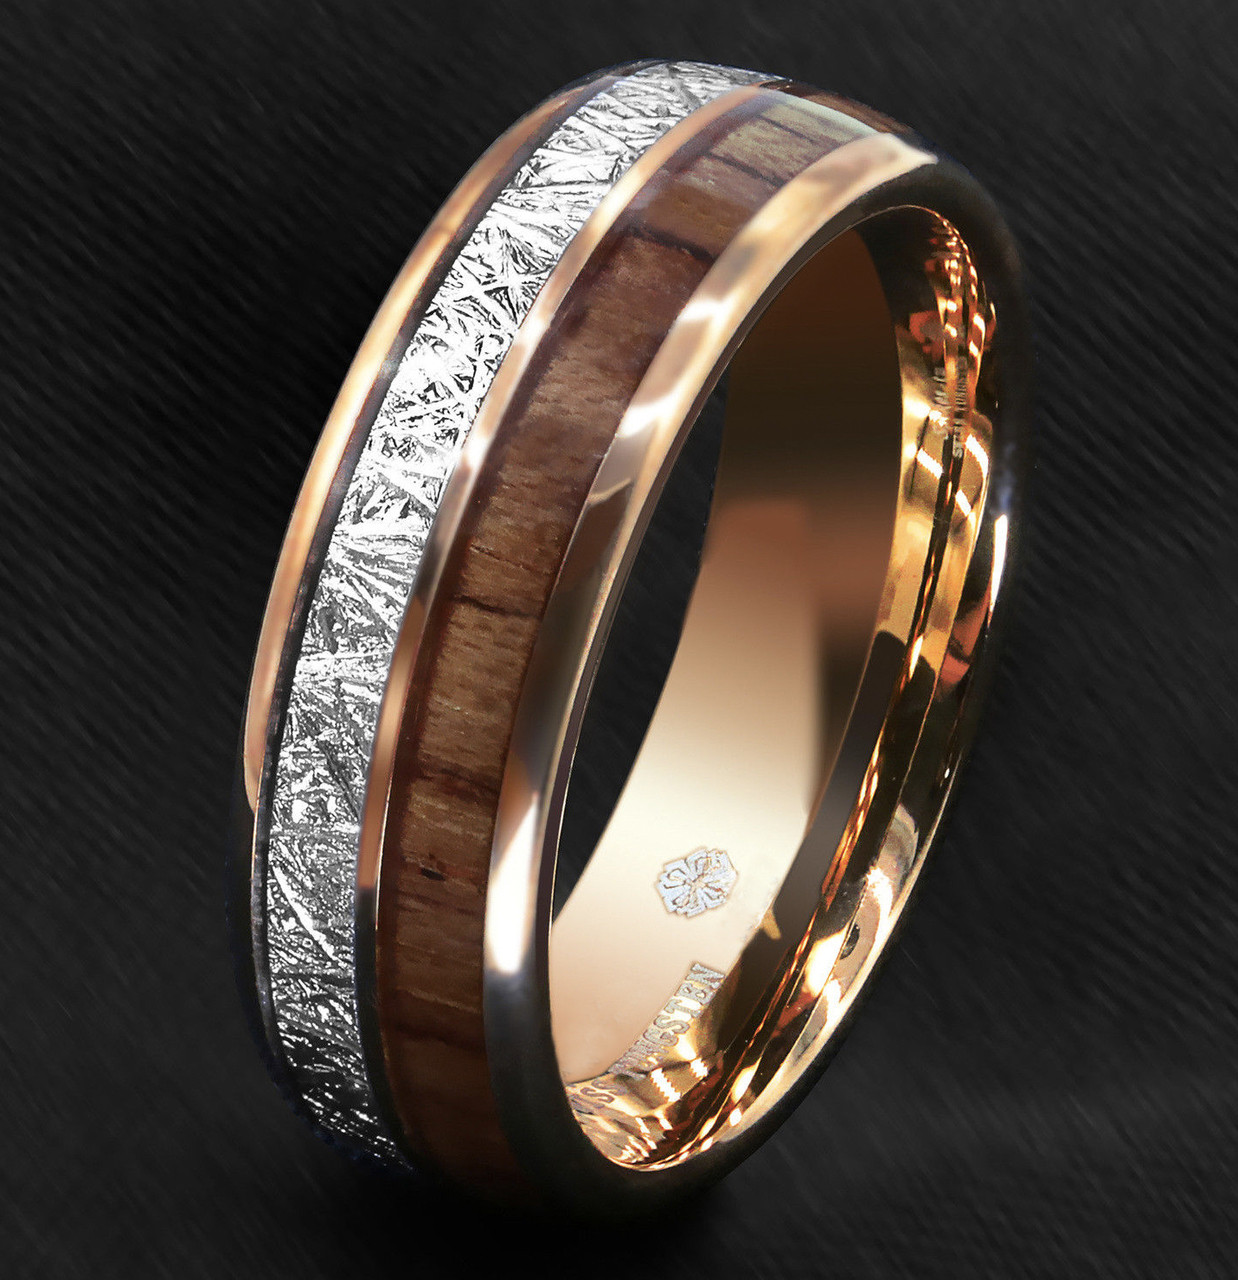 (8mm)  Unisex or Men's Wedding Tungsten Carbide Wedding ring band. Rose Gold Tungsten Carbide Band with Wood Inlay and Inspired Meteorite. Domed Tungsten Carbide Ring. Comfort Fit